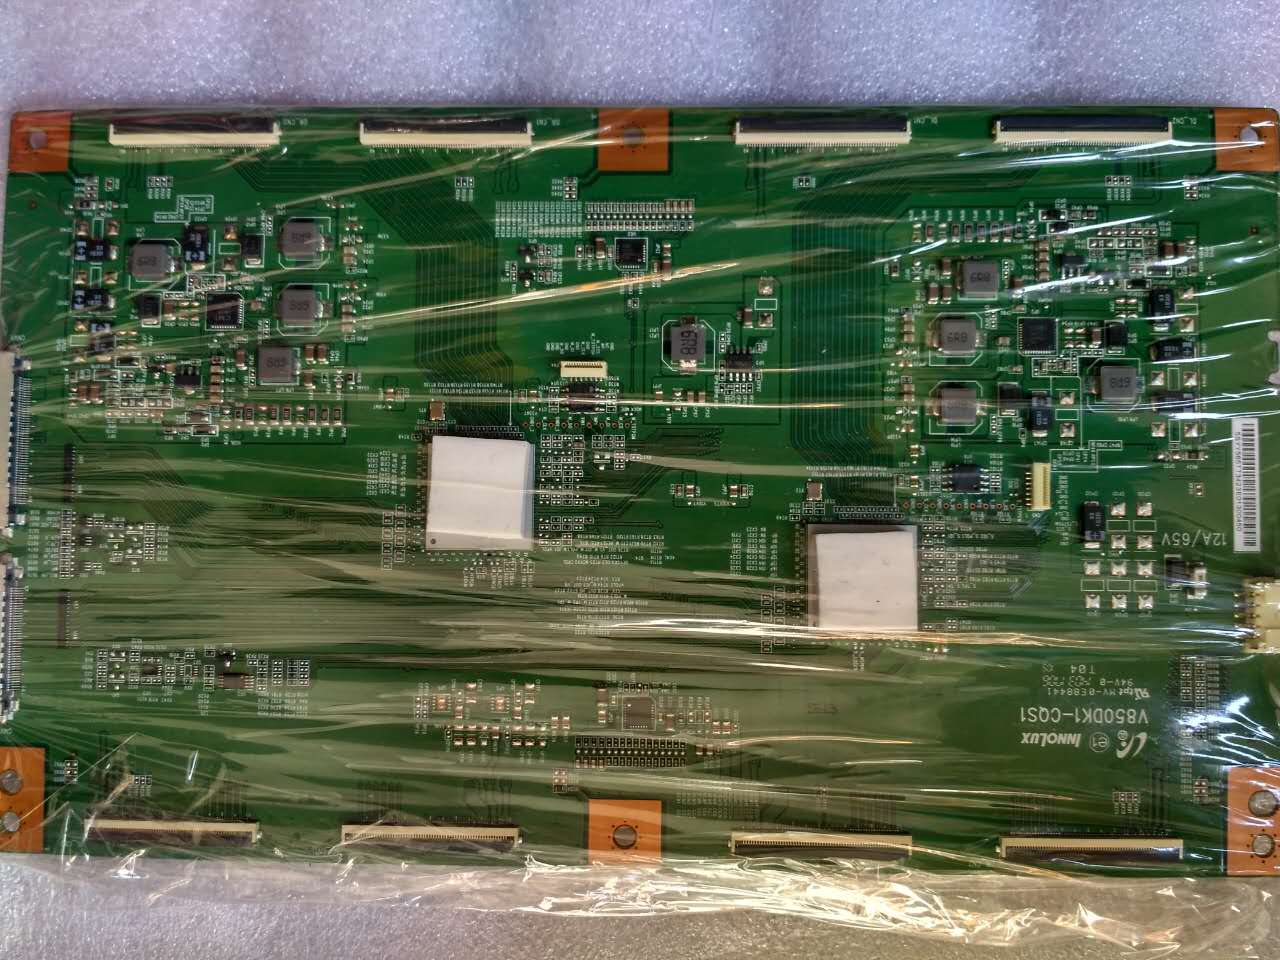 NEW SONY 85" XBR-85X950B V850DK1-CQS1 T-Con Timing Control Board - Click Image to Close